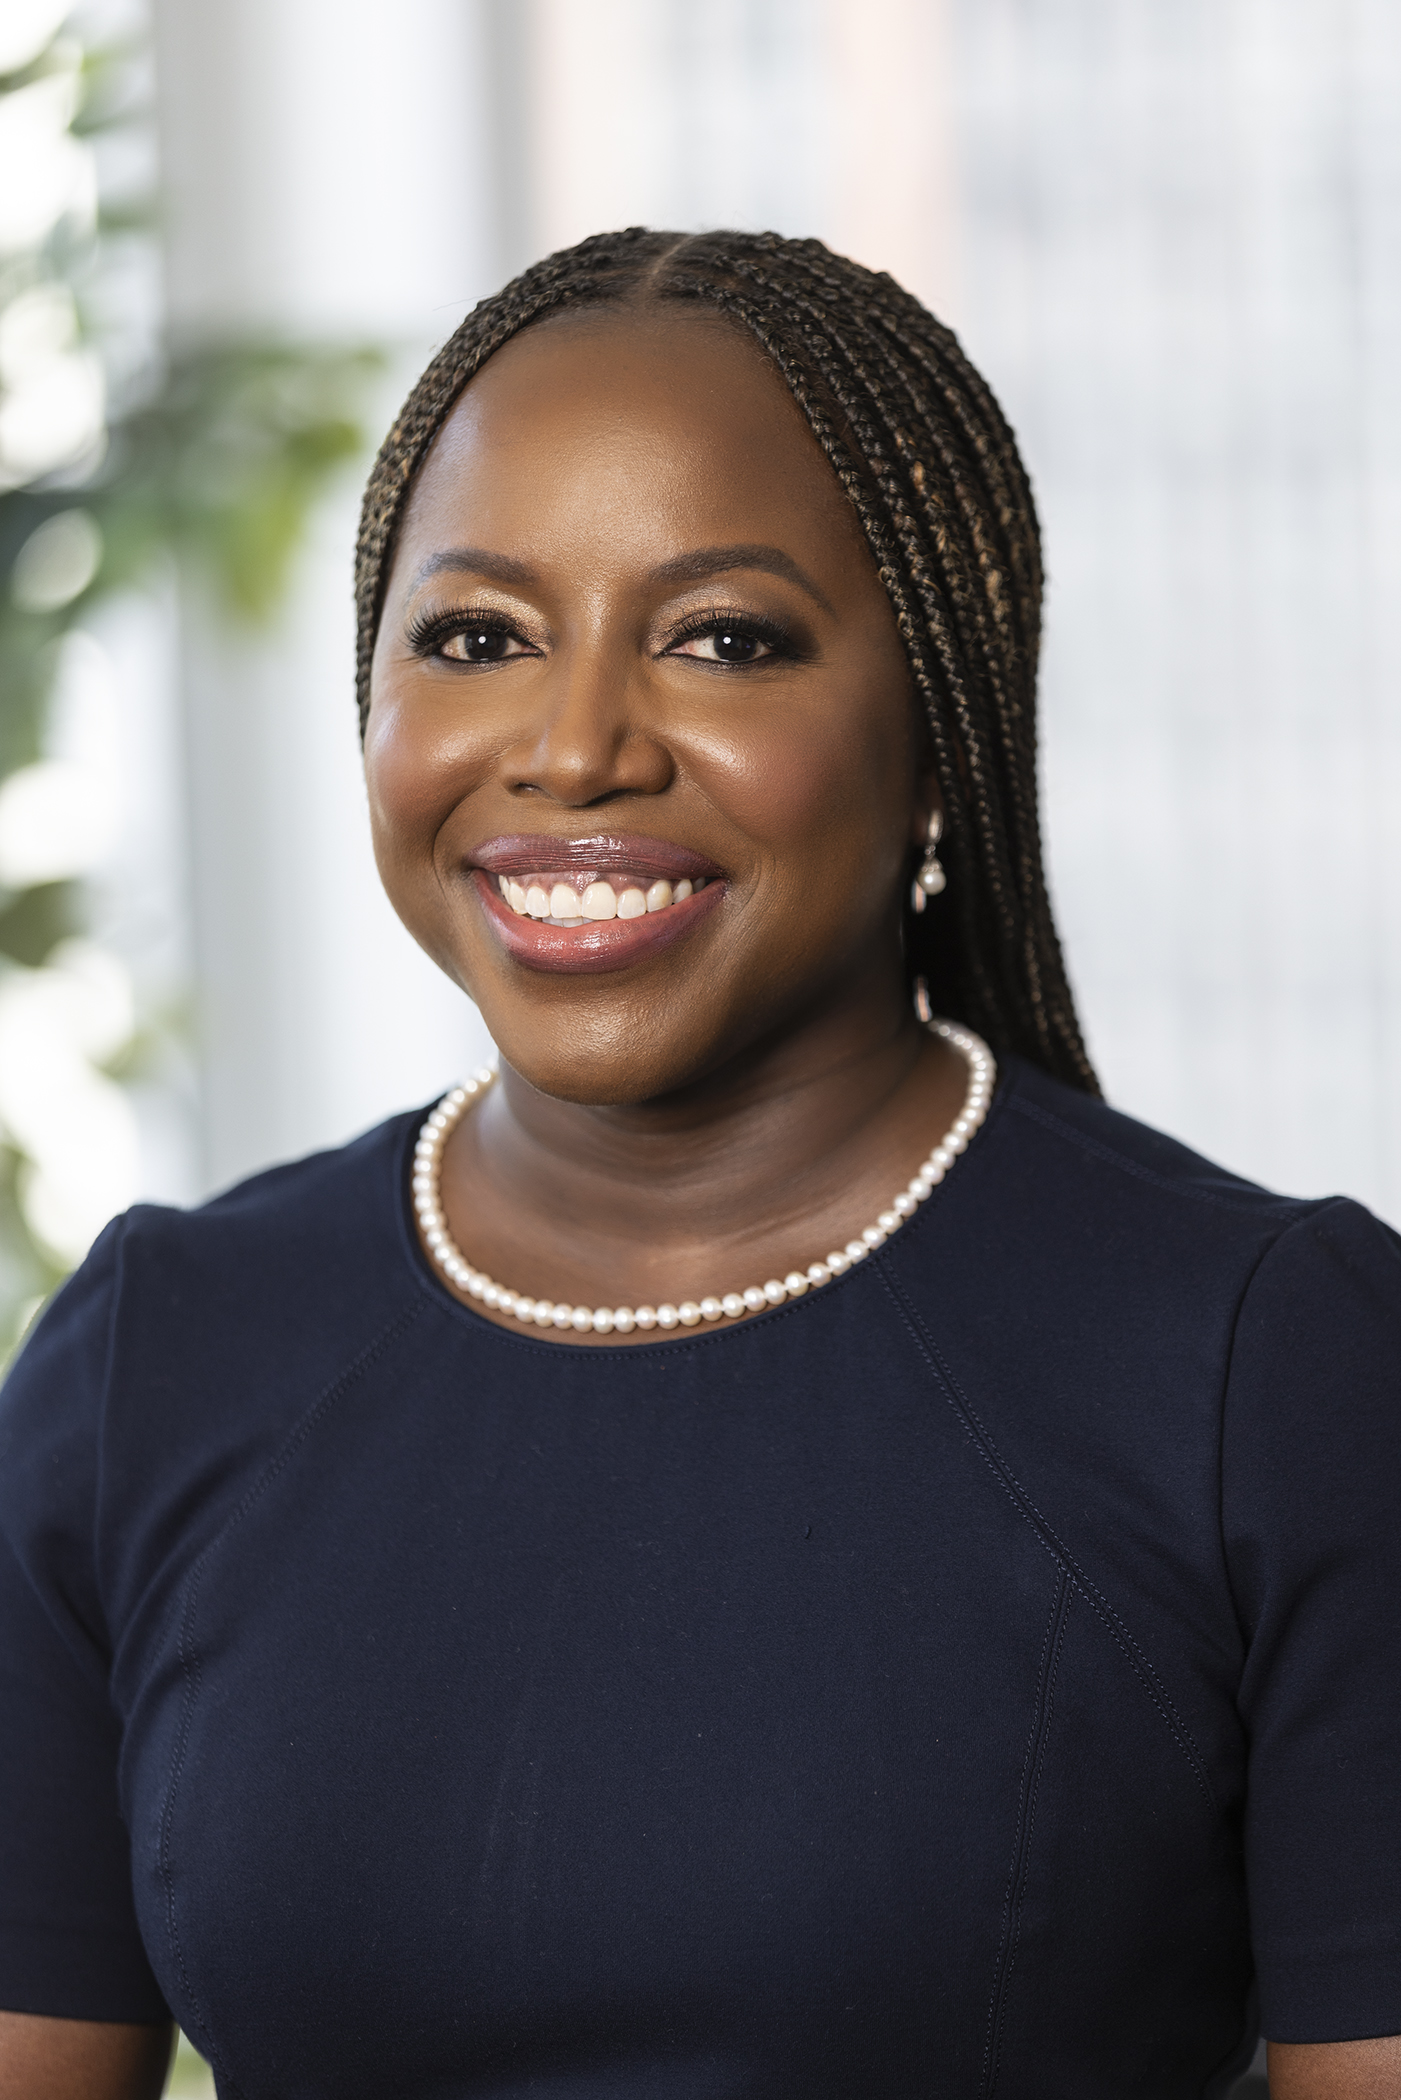 Professional headshot of a black woman with braids who is wearing a navy blue dress and smiling.